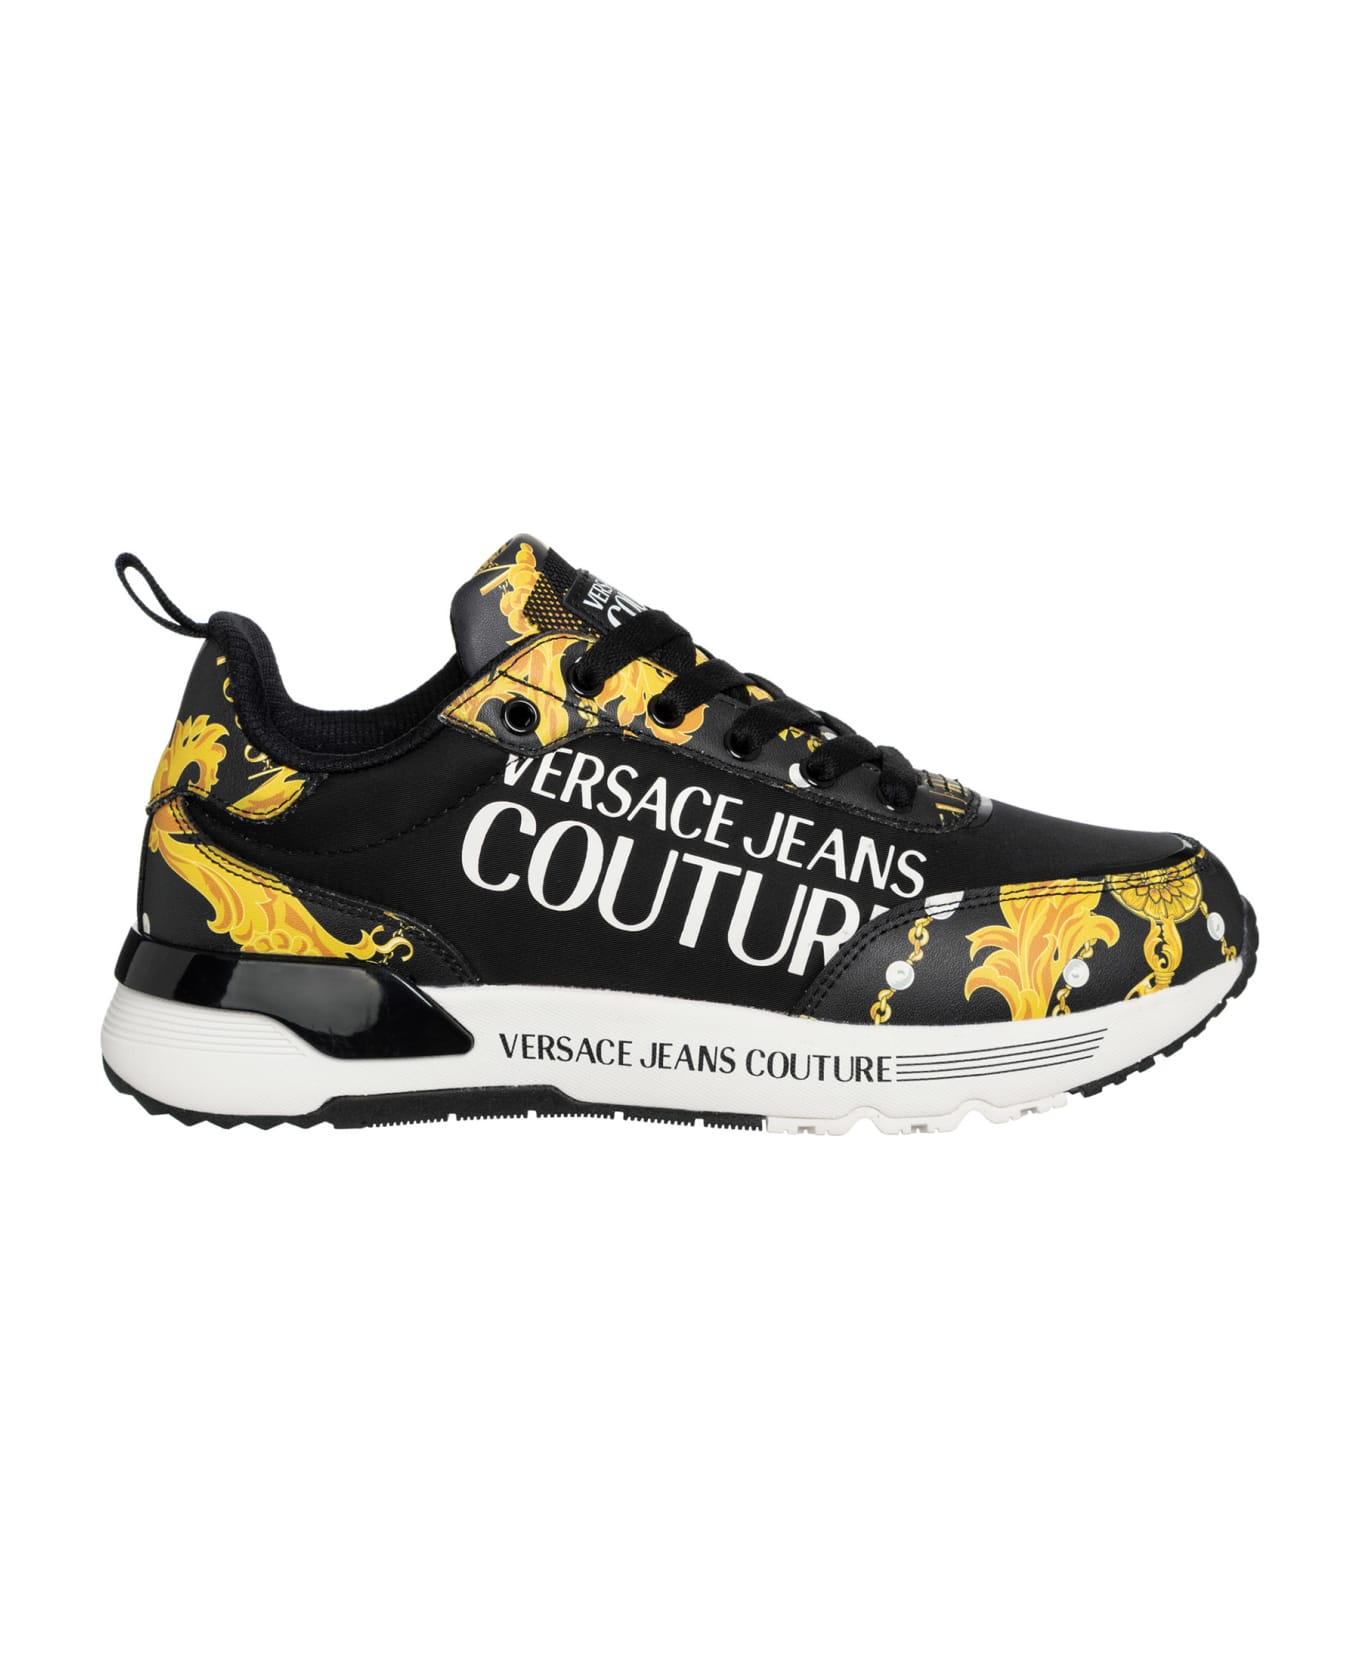 Versace Jeans Couture Dynamic Chain Couture Leather Sneakers - BLACK/GOLD スニーカー